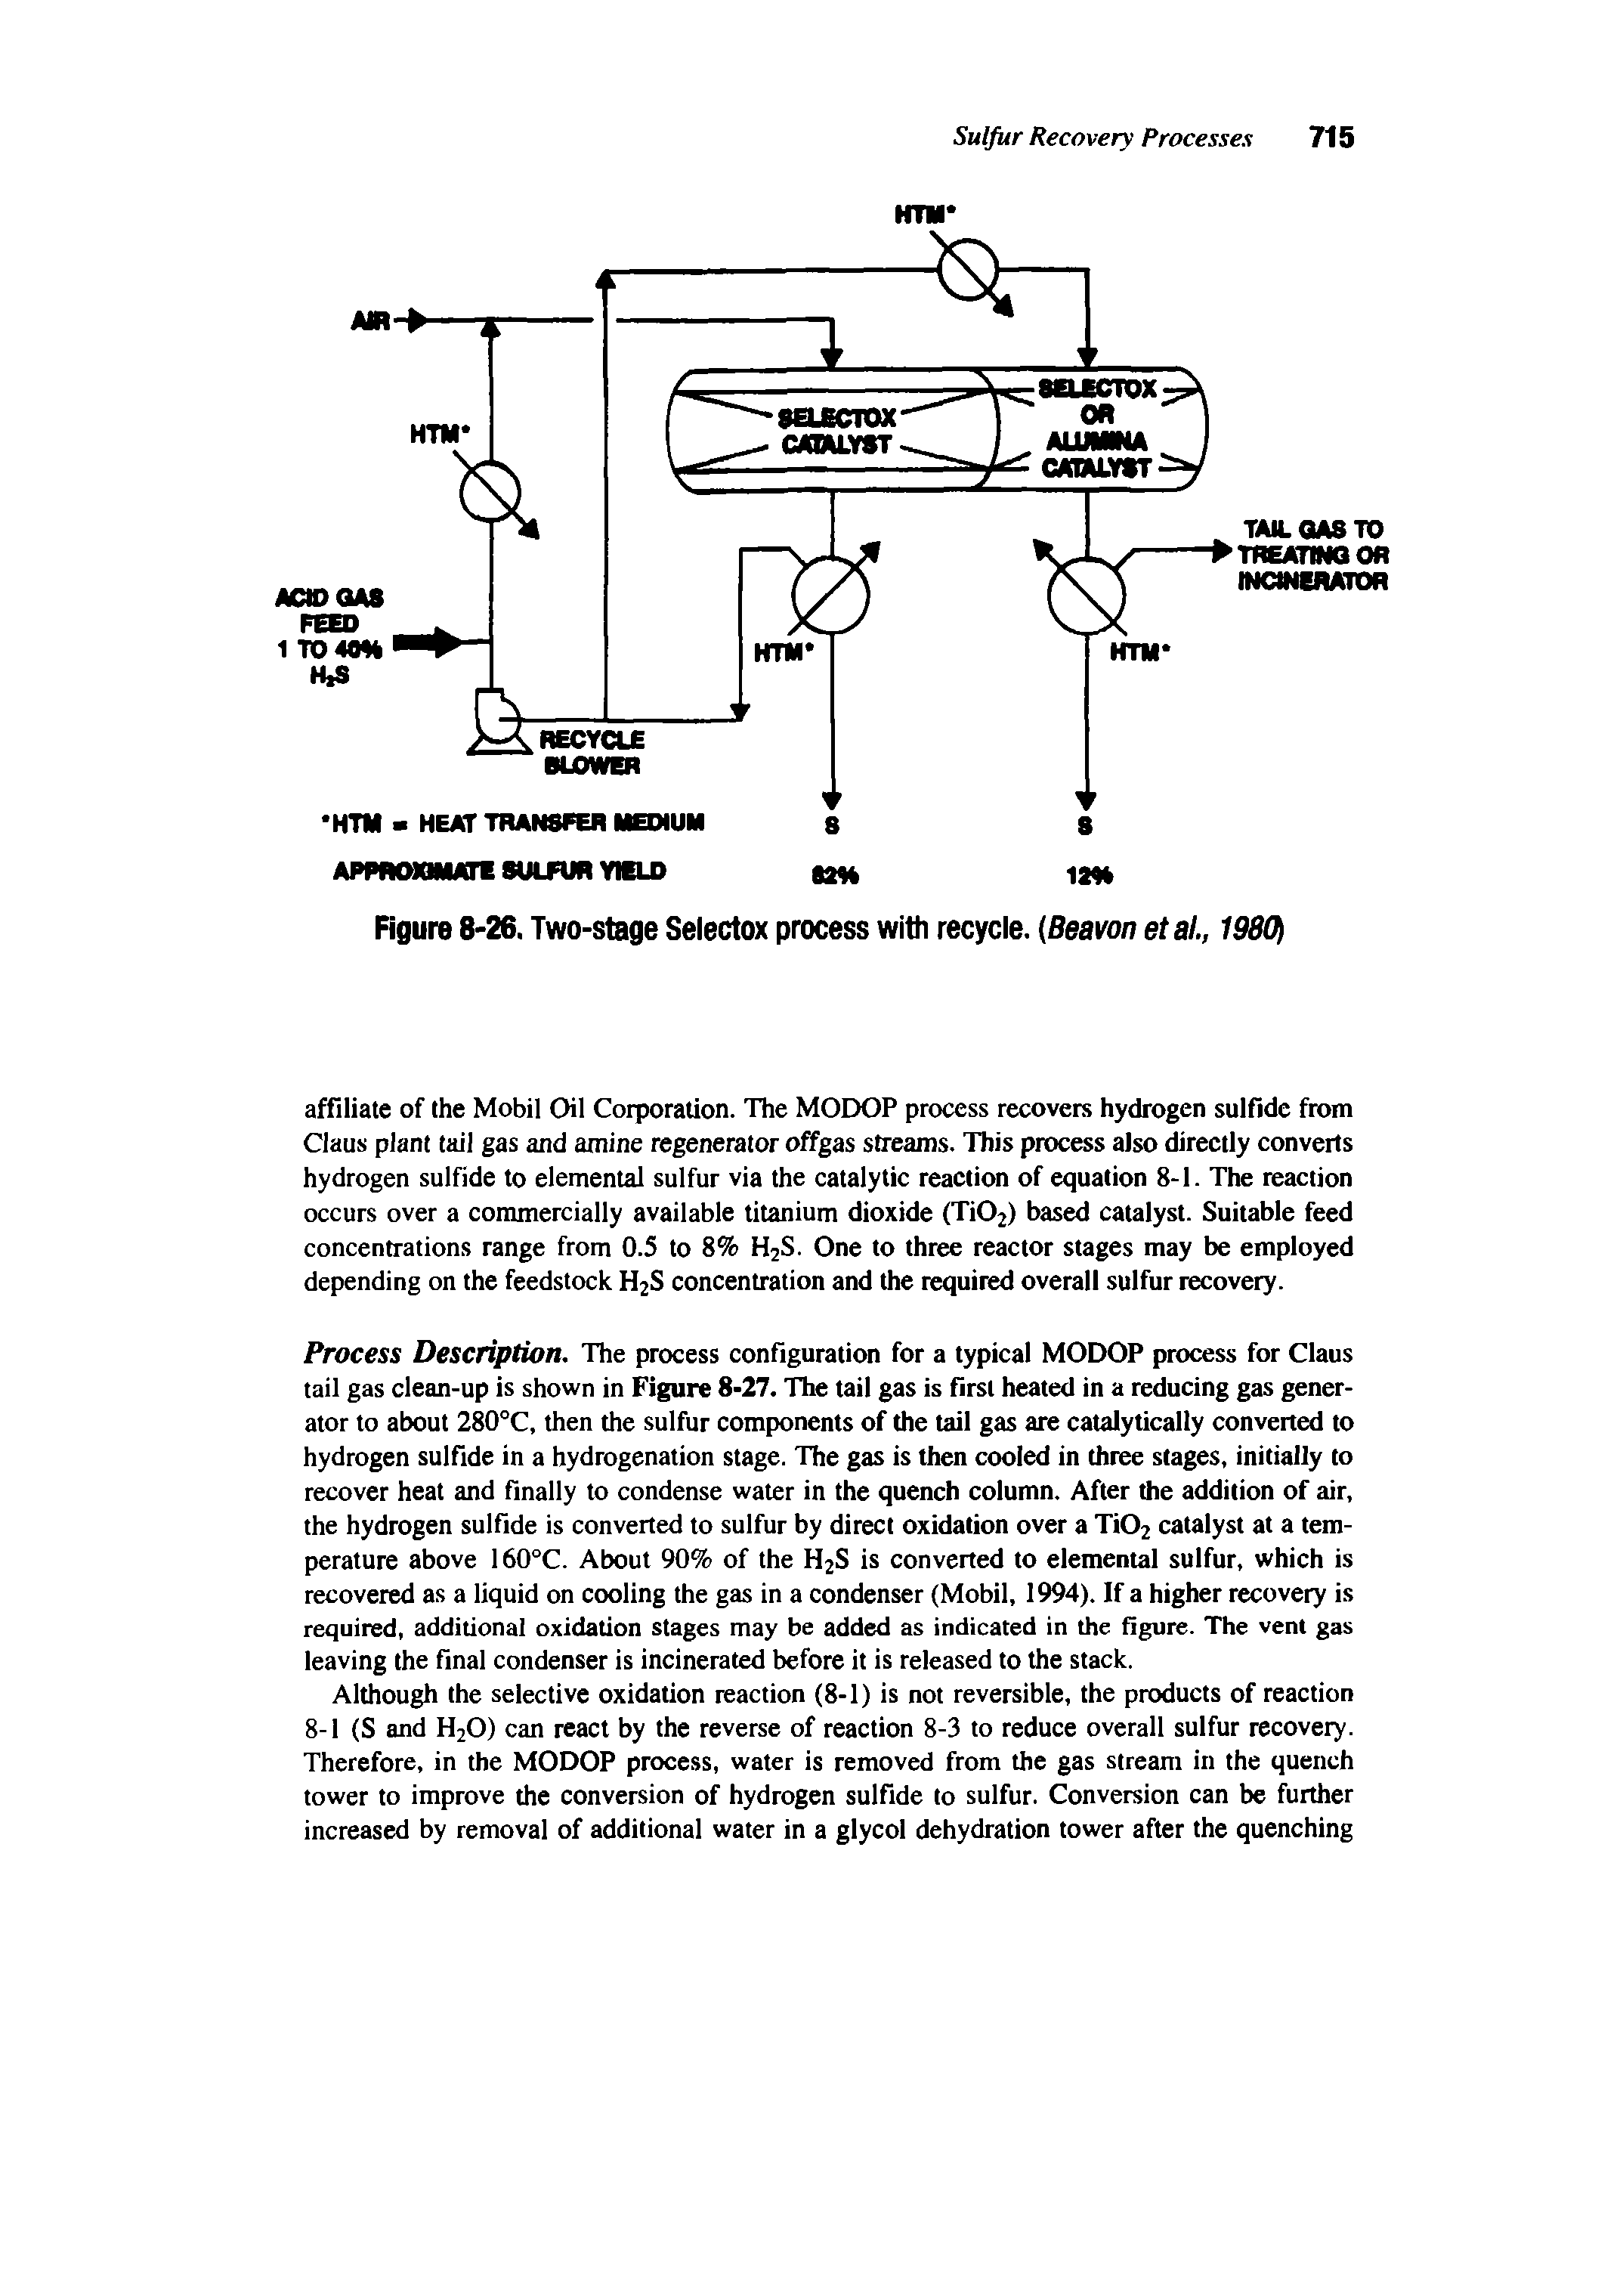 Figure 8-26, Two-stage Selectox process with recycle. (Beavon etal., 19801...